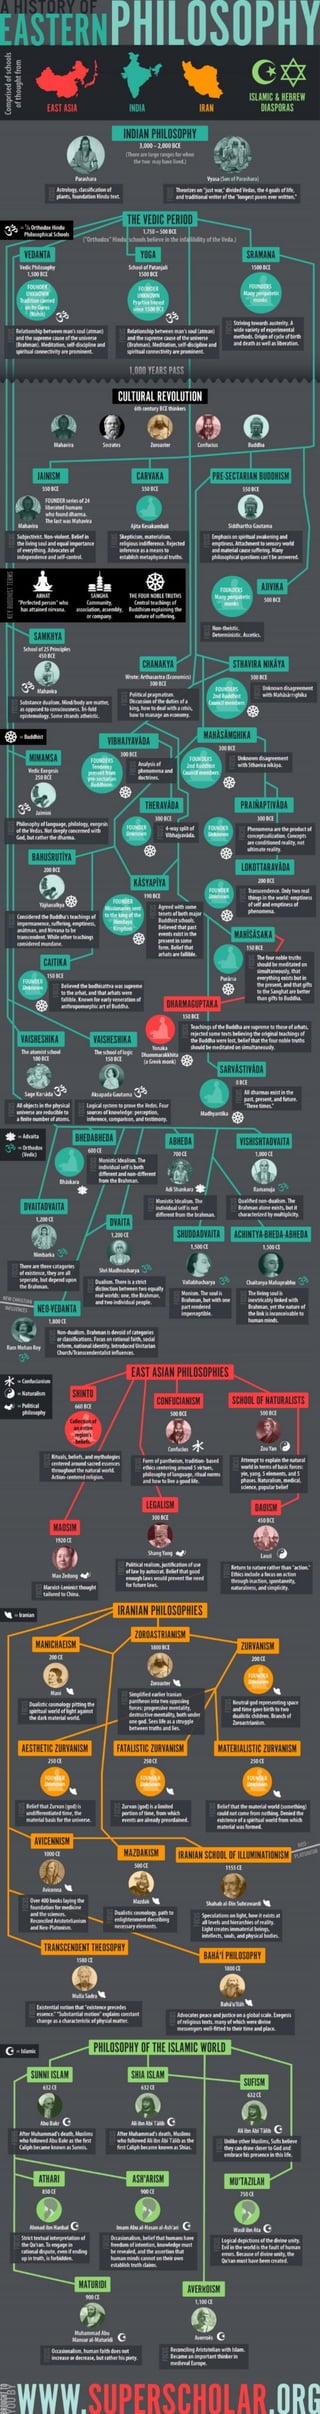 Timeline : A History of Eastern Philosophy